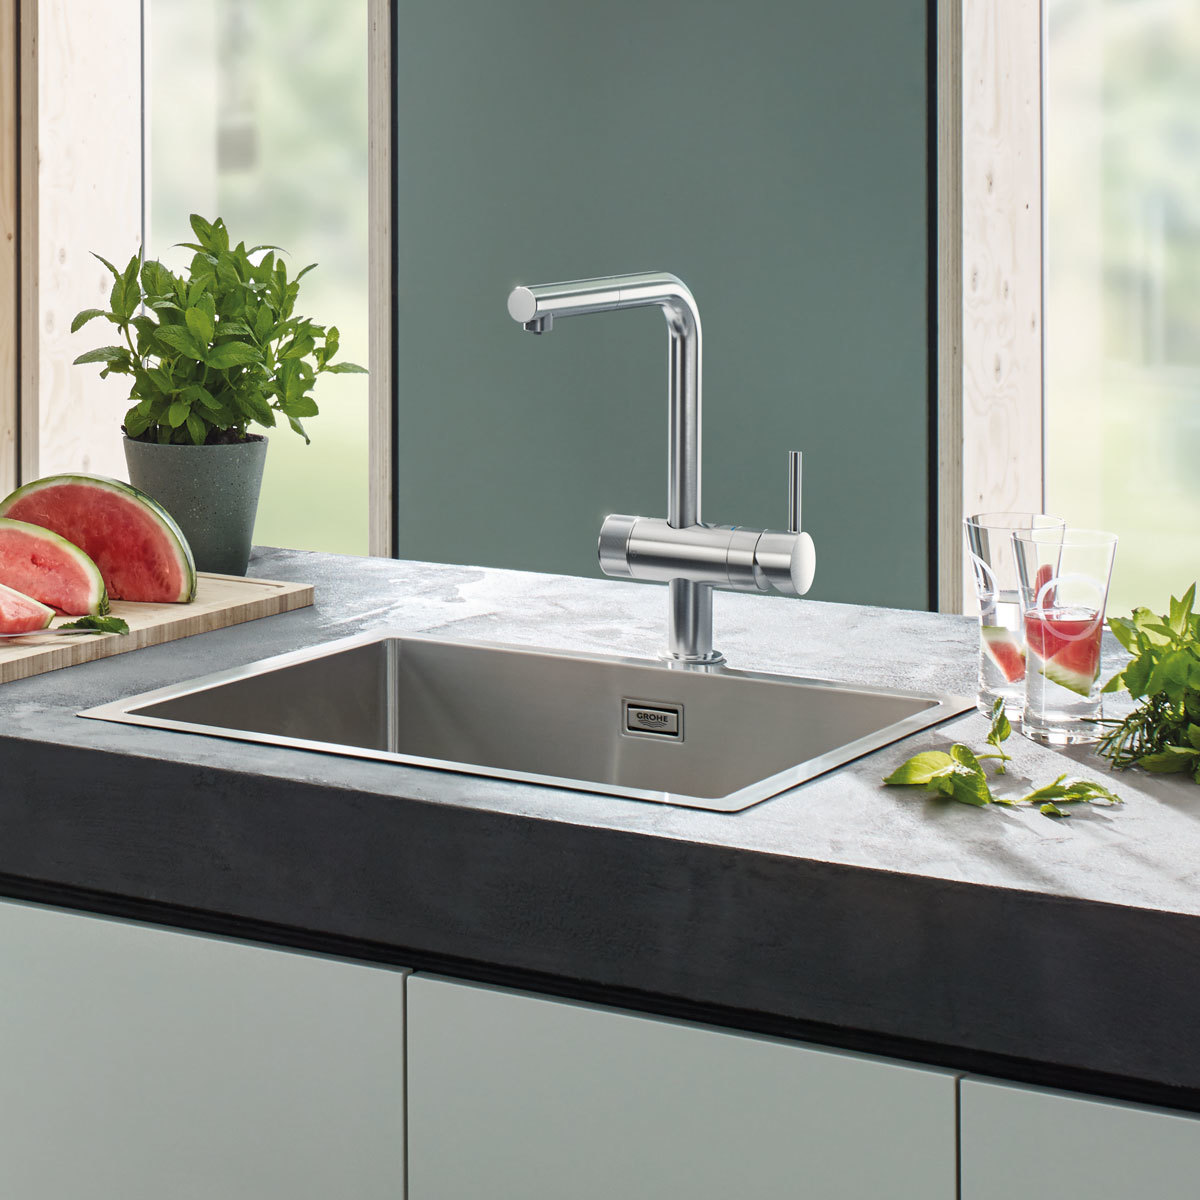 Lifestyle image of supersteel tap in lifestyle setting close up